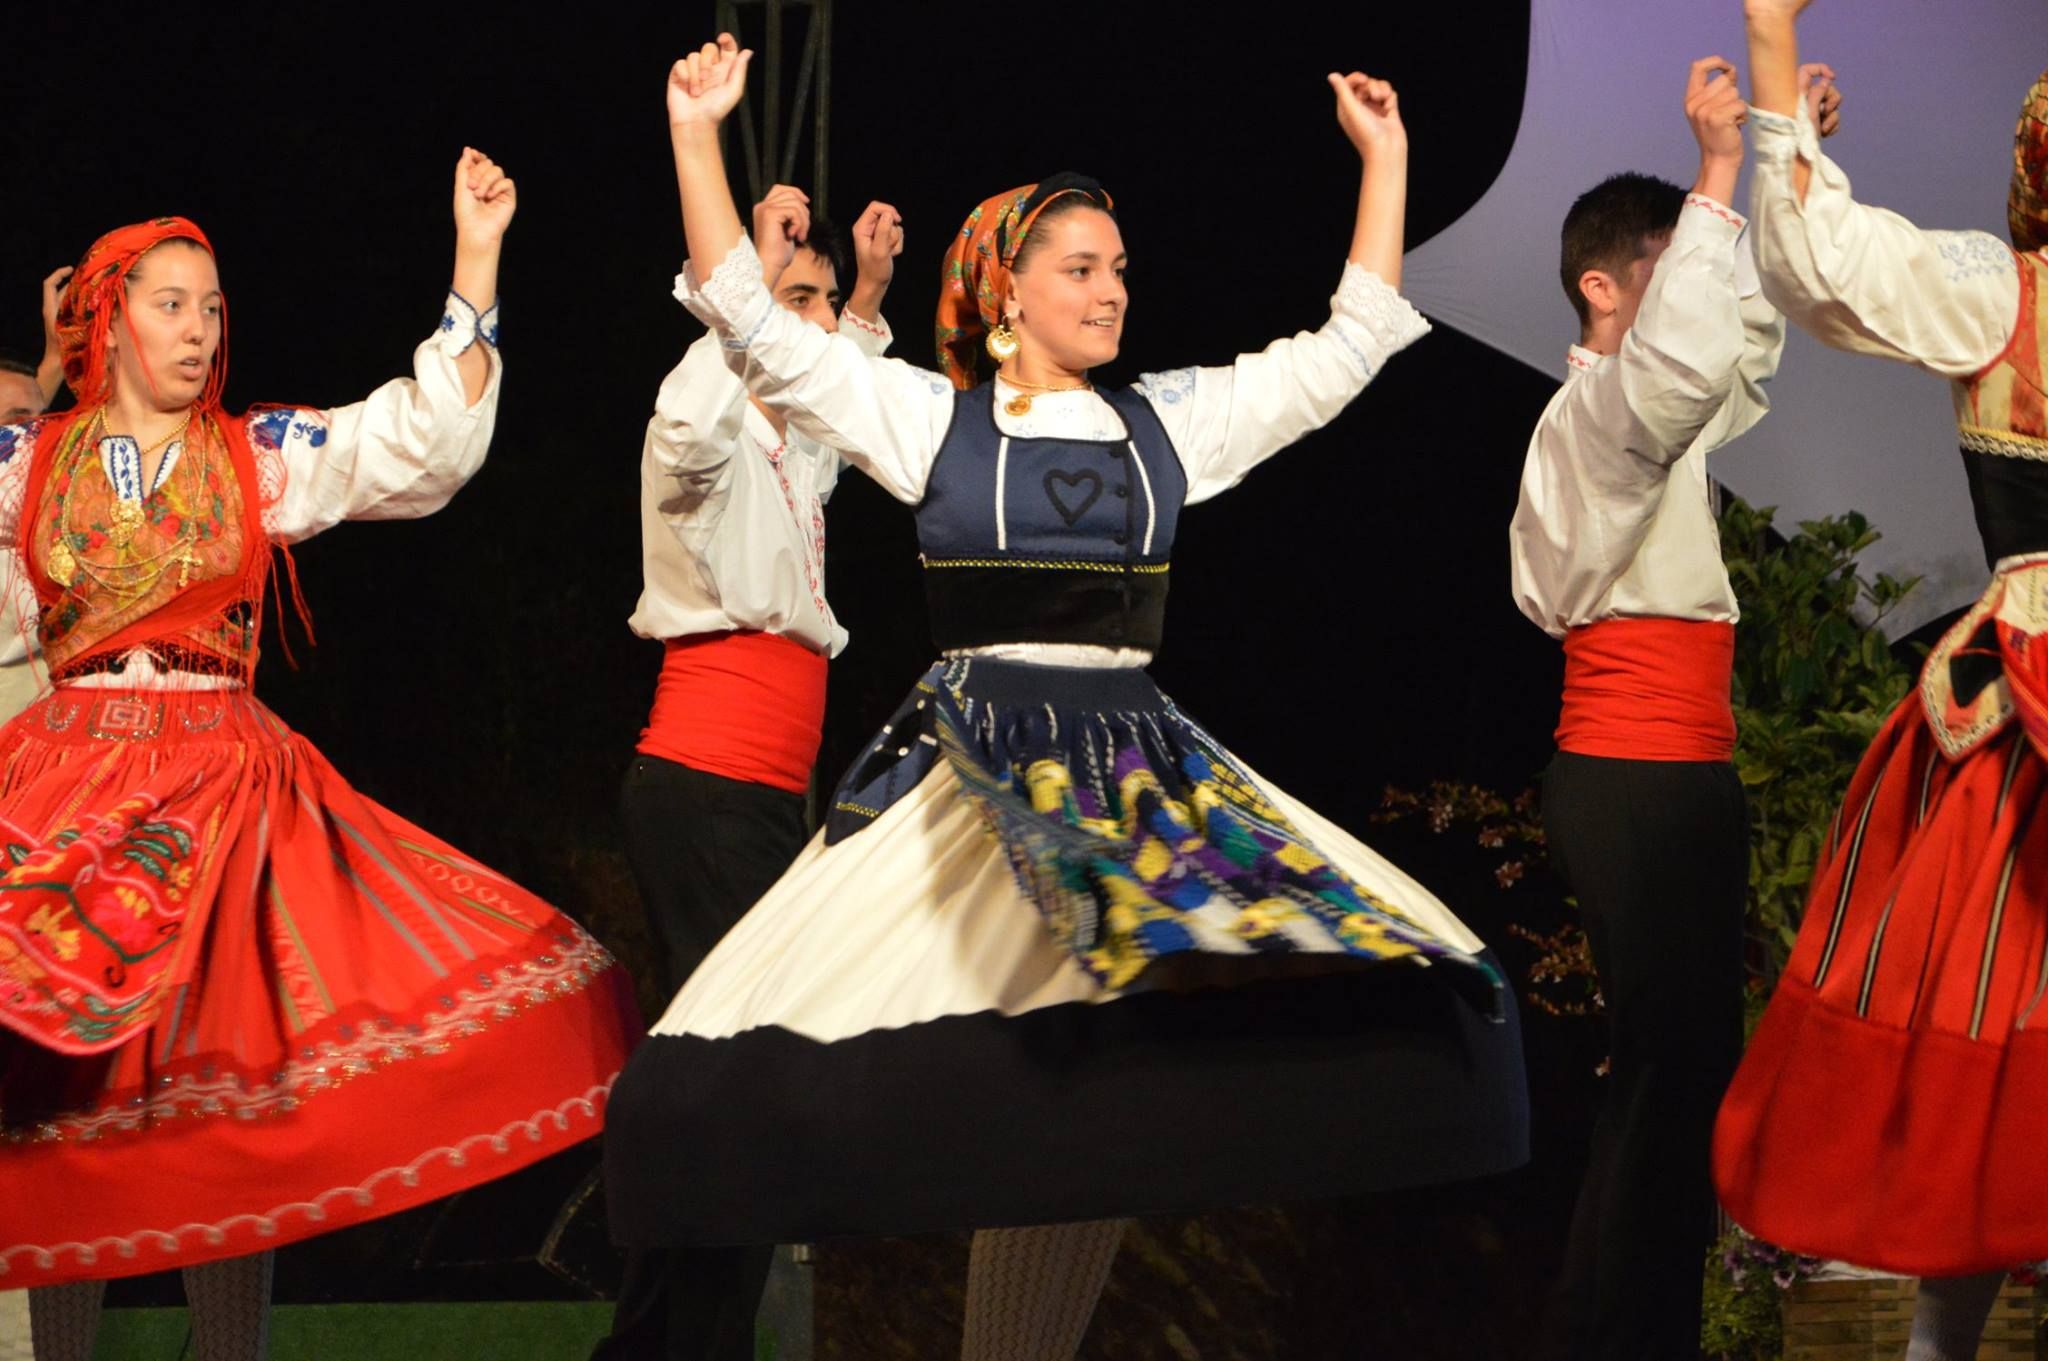 Tomar celebrated the National Day of Portuguese Folklore